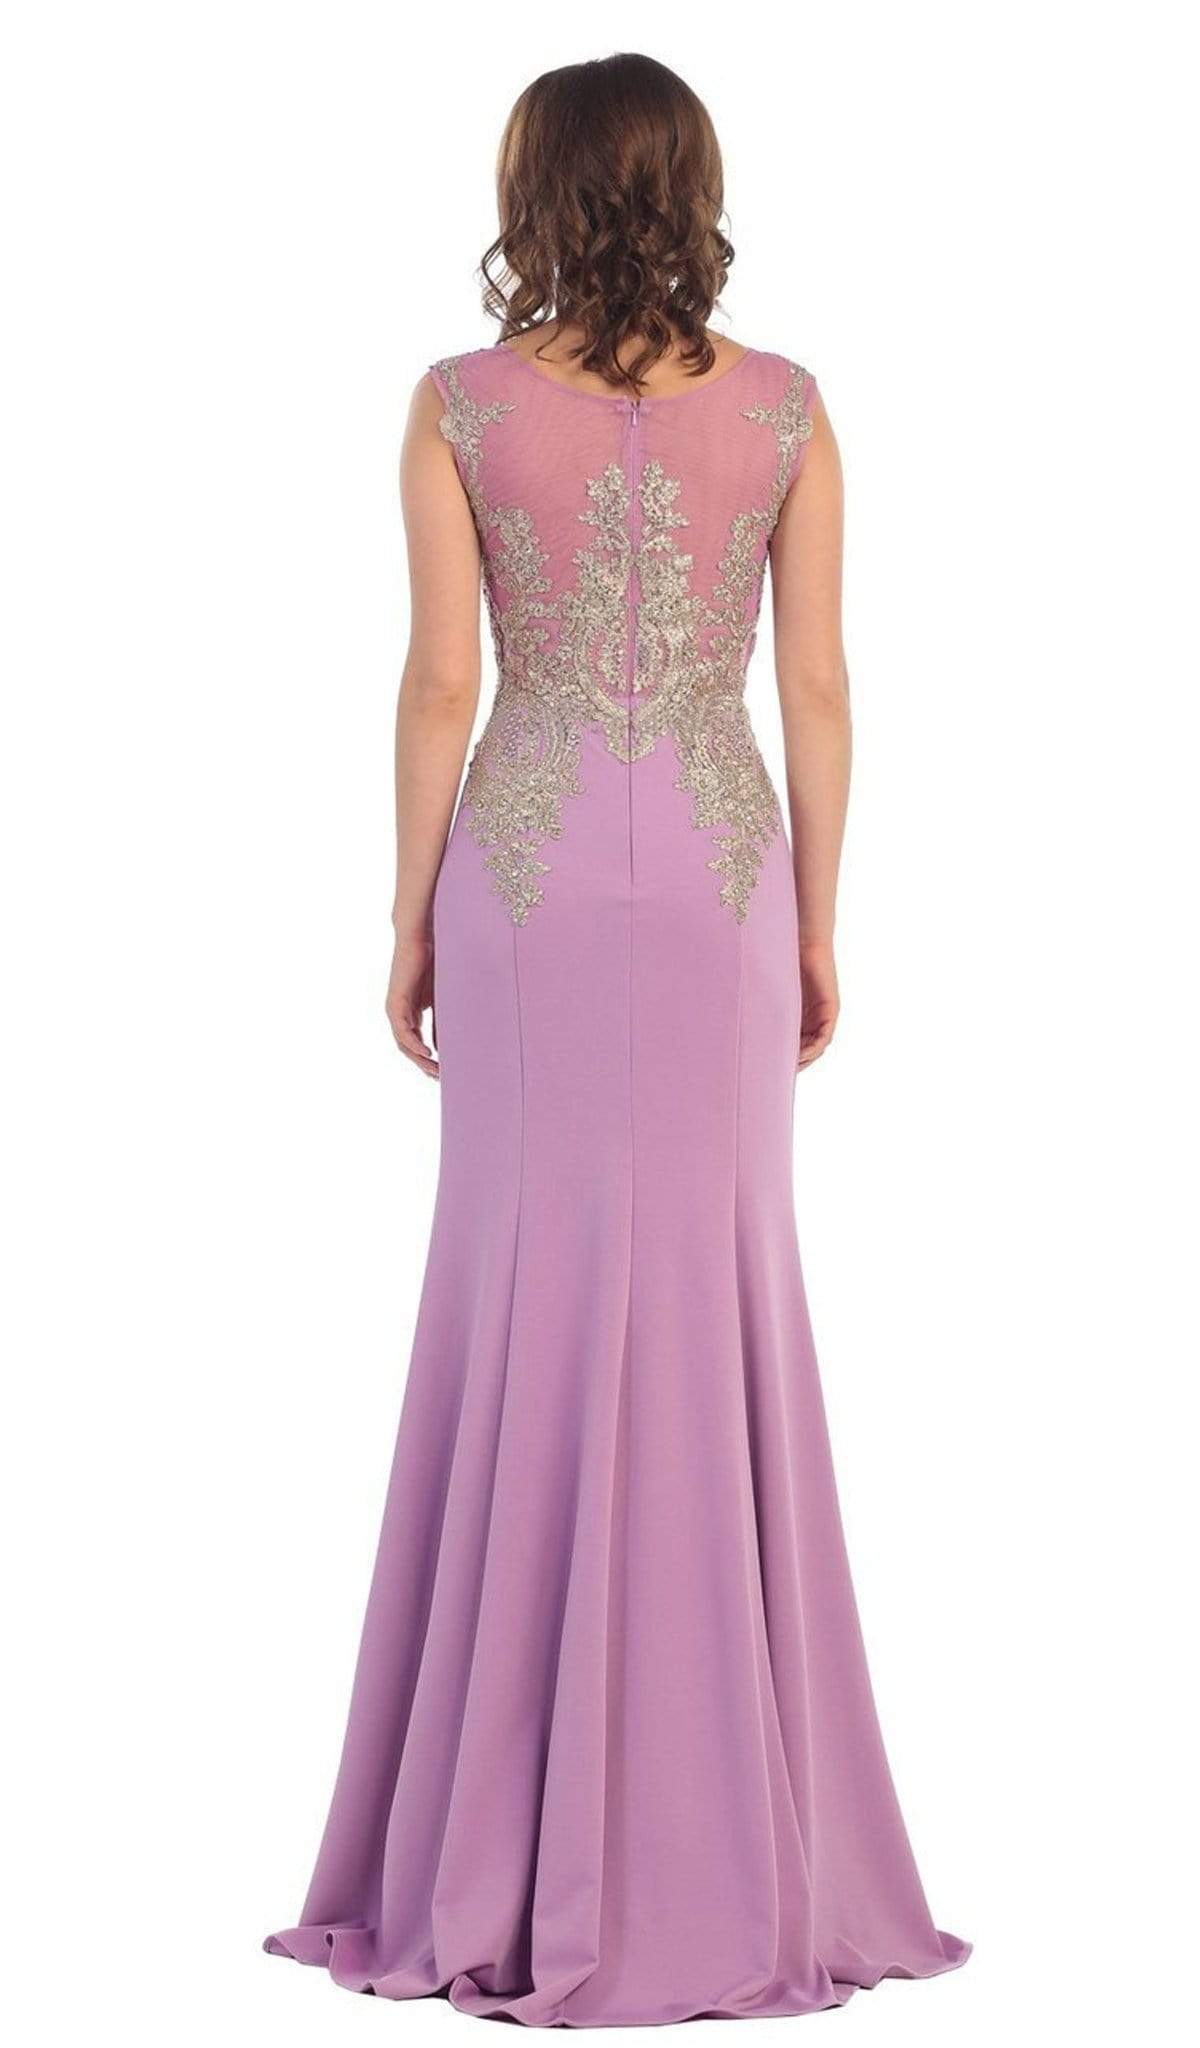 May Queen - Illusion Scoop Lace Prom Gown Special Occasion Dress